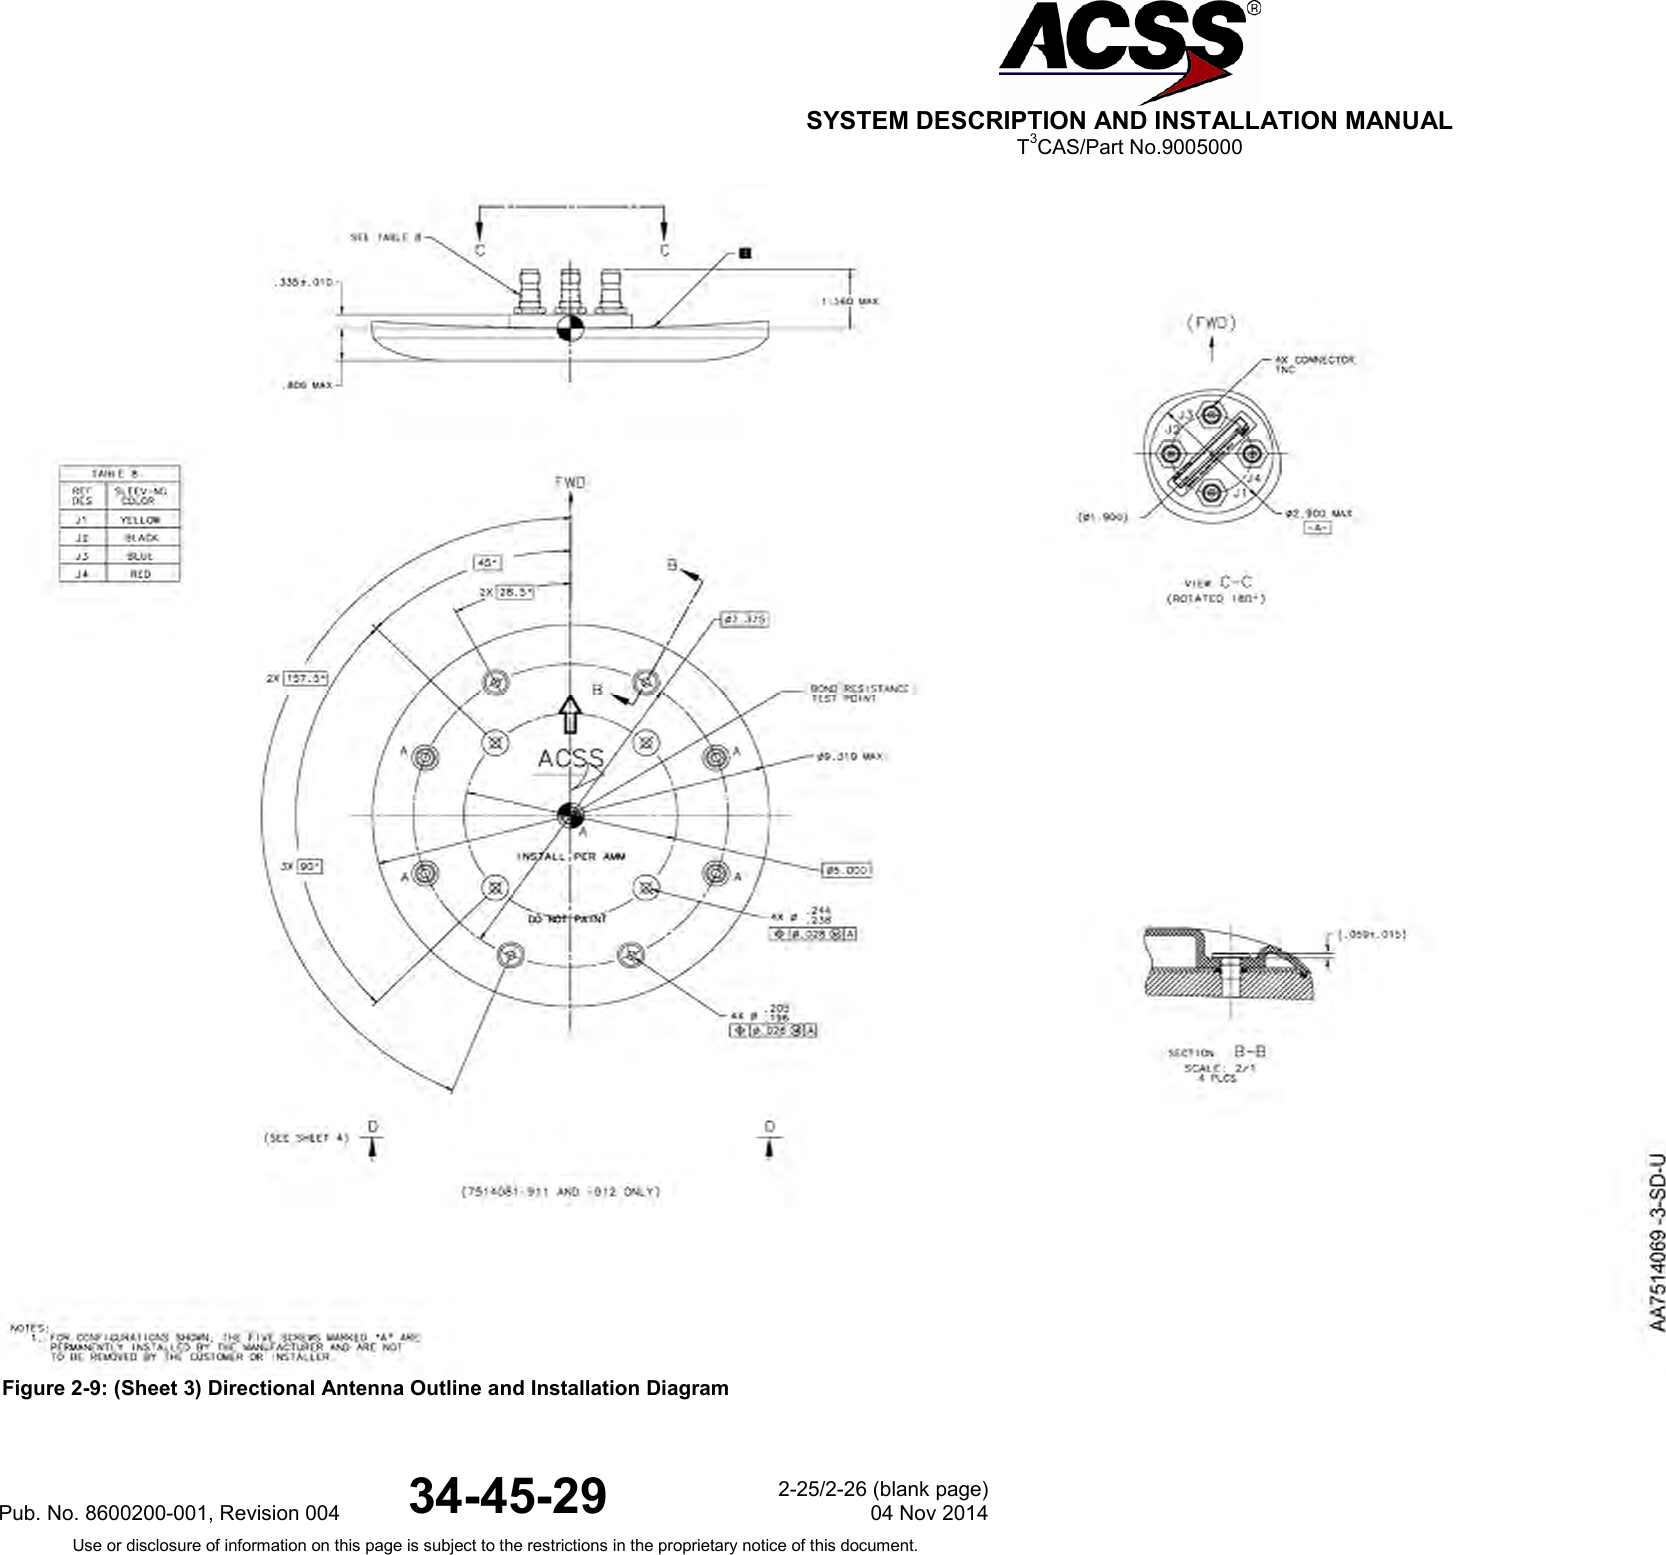  SYSTEM DESCRIPTION AND INSTALLATION MANUAL T3CAS/Part No.9005000  Figure 2-9: (Sheet 3) Directional Antenna Outline and Installation DiagramPub. No. 8600200-001, Revision 004  34-45-29 2-25/2-26 (blank page) 04 Nov 2014 Use or disclosure of information on this page is subject to the restrictions in the proprietary notice of this document.  